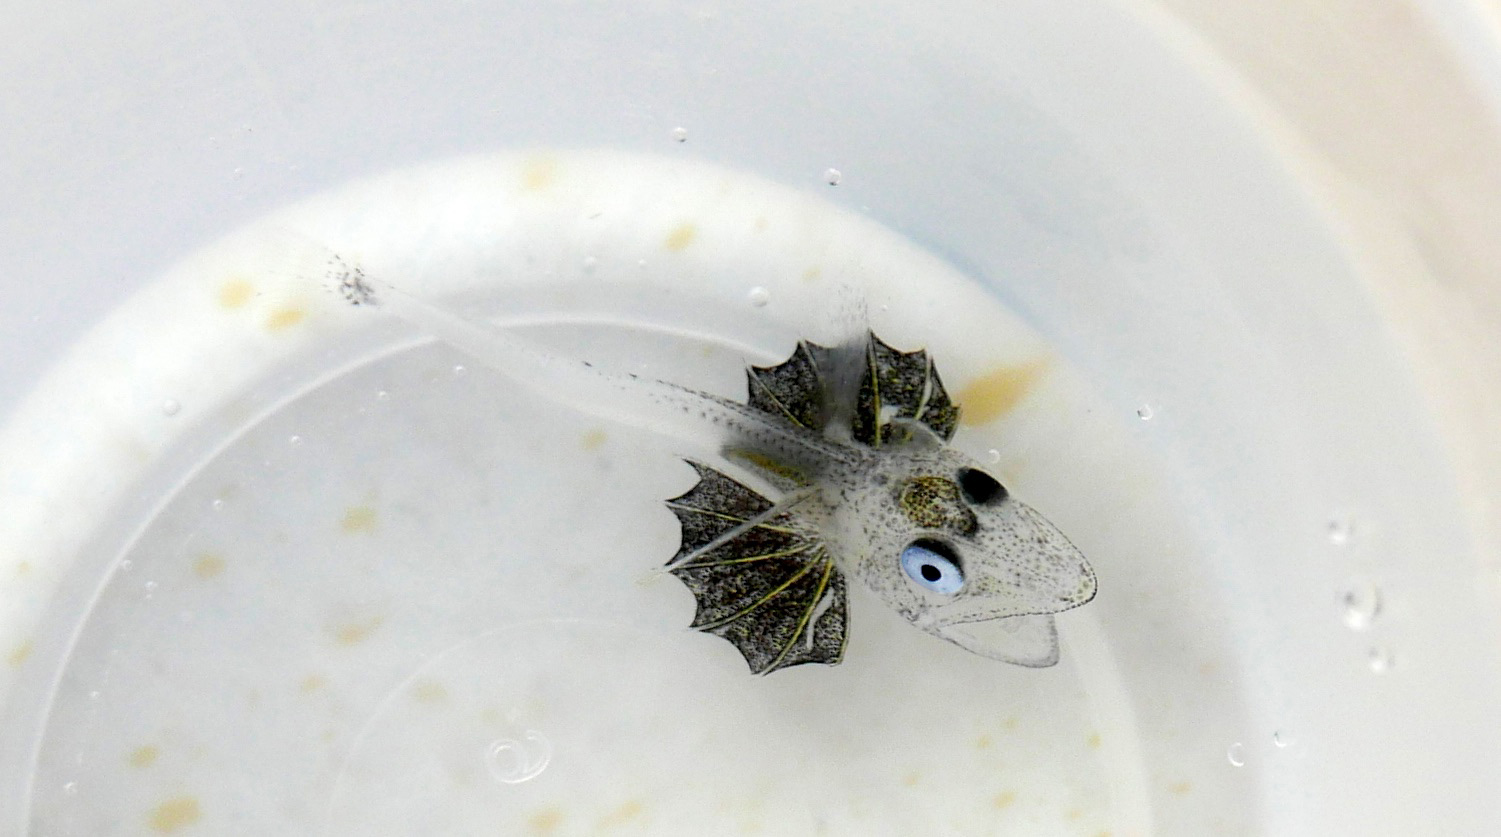 Young icefish